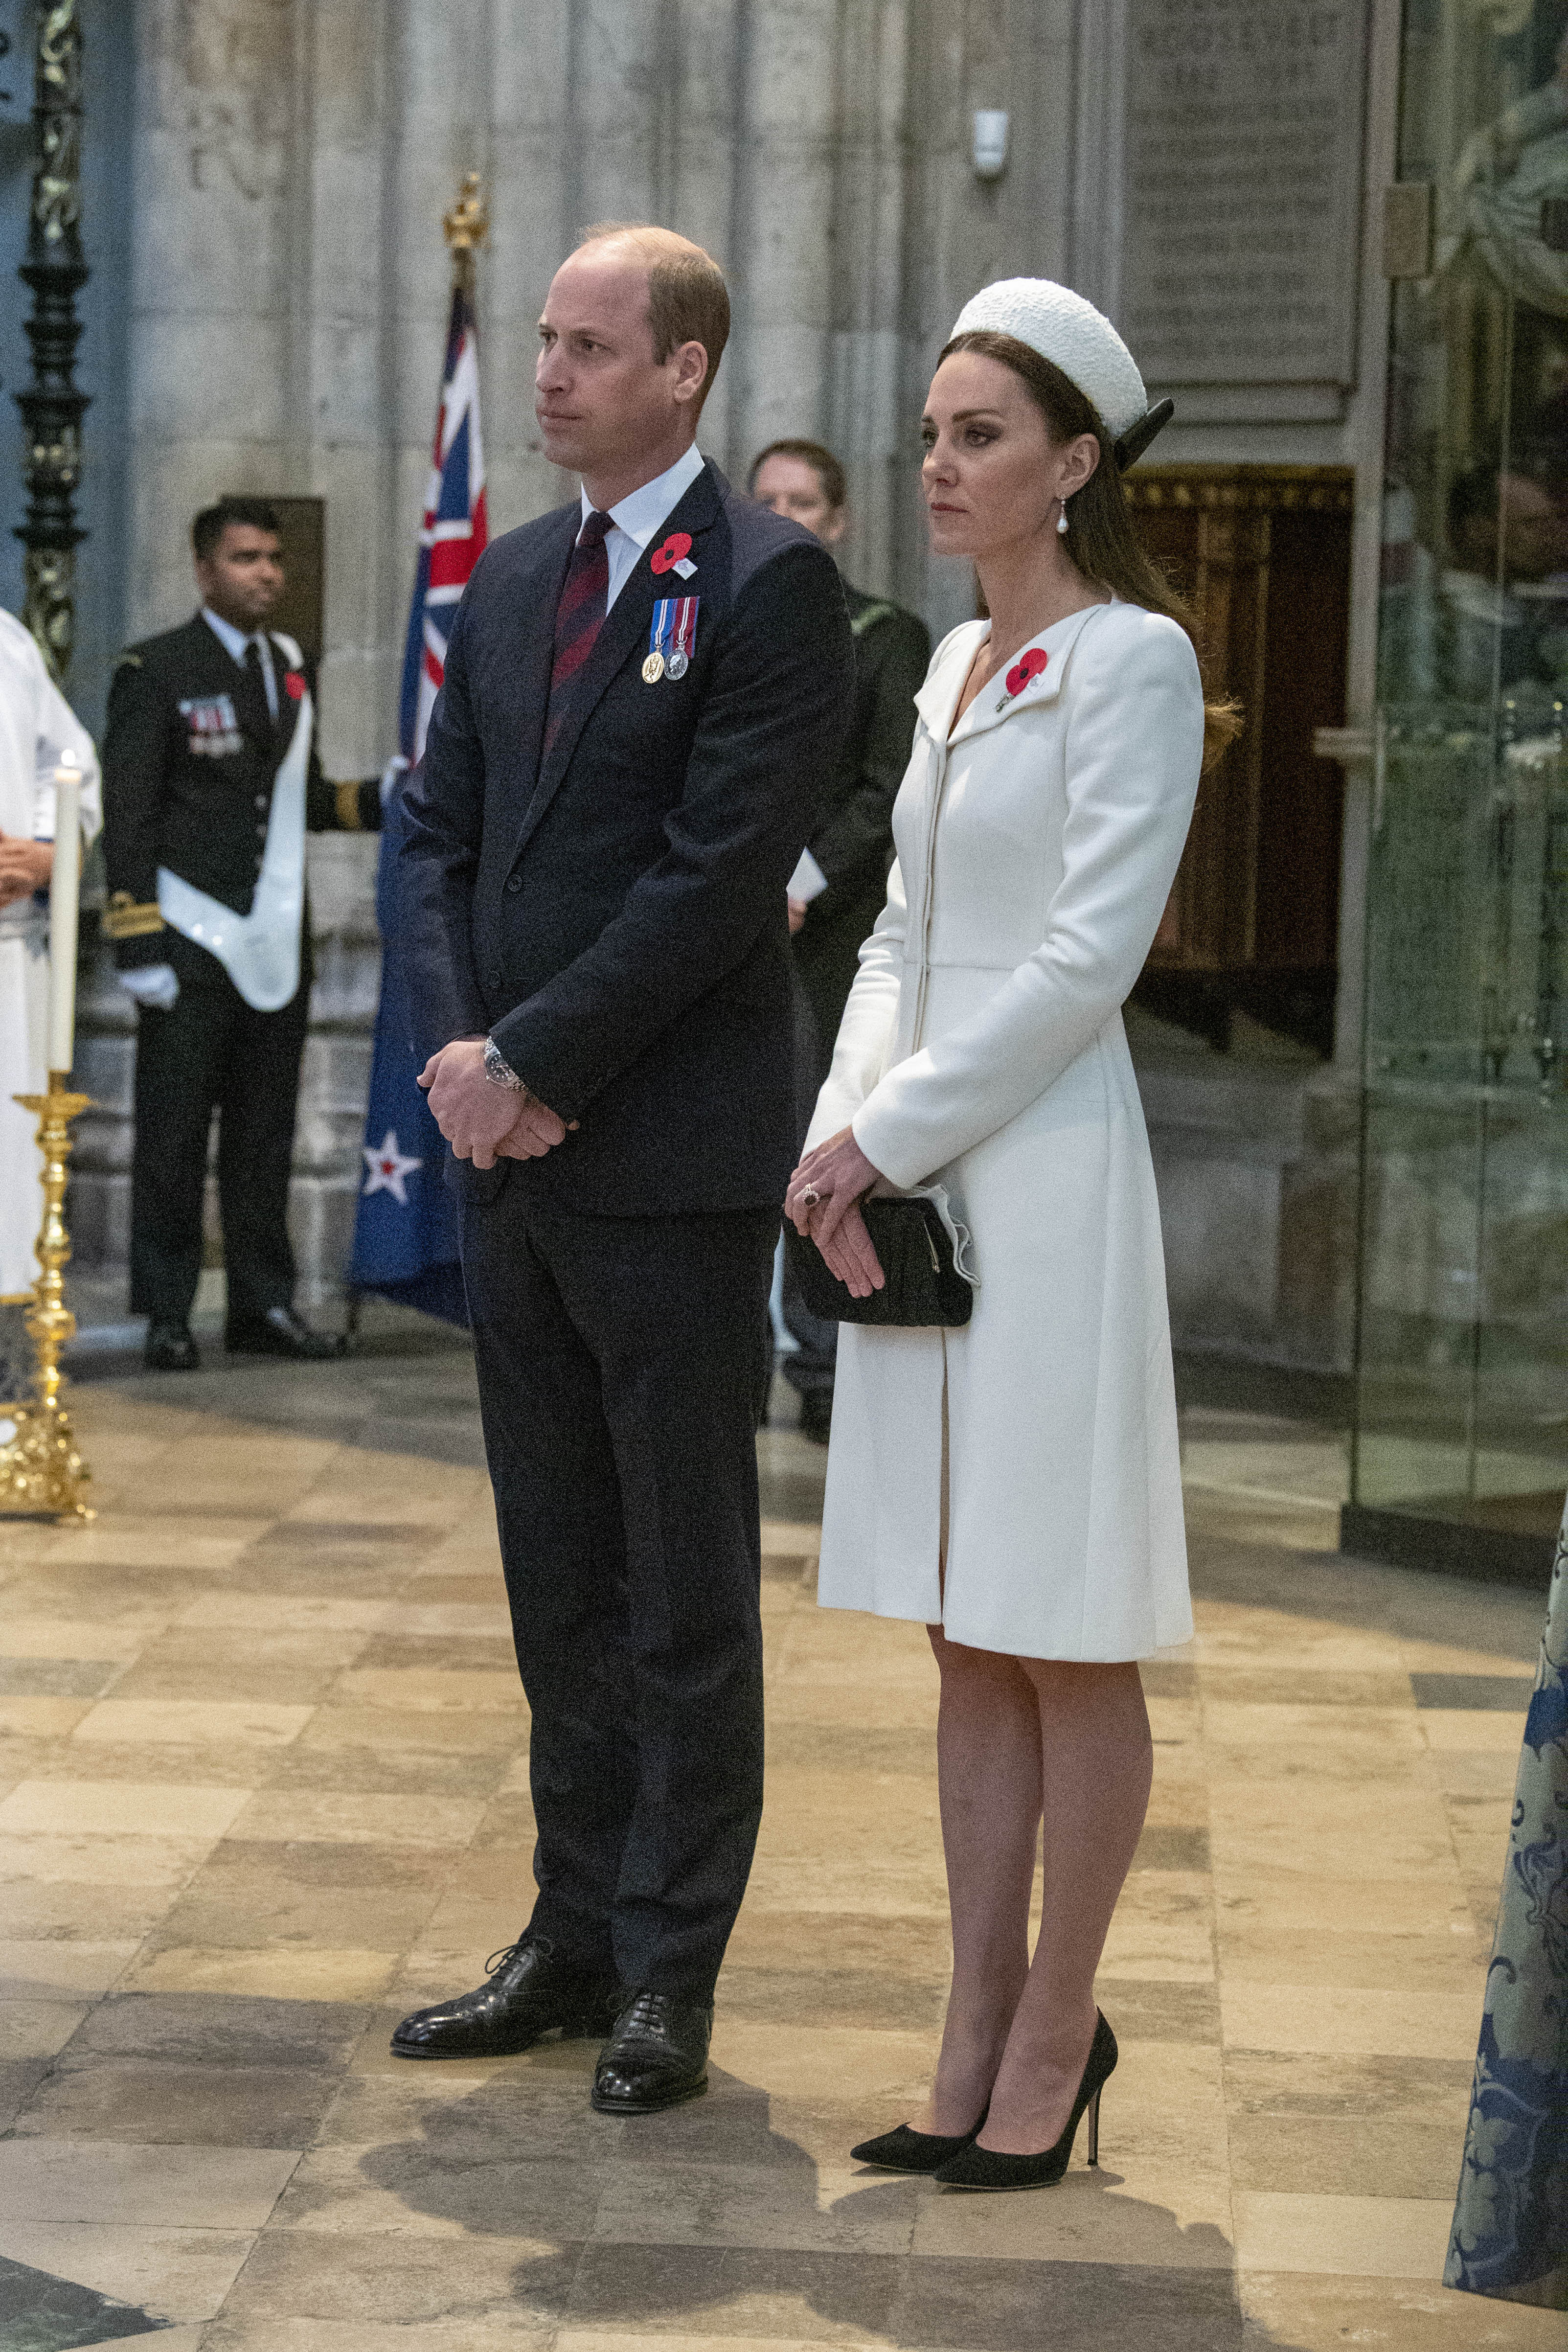 At the service in Westminster Abbey, Kate Middleton diverted attention from bags under her eyes - slender legs